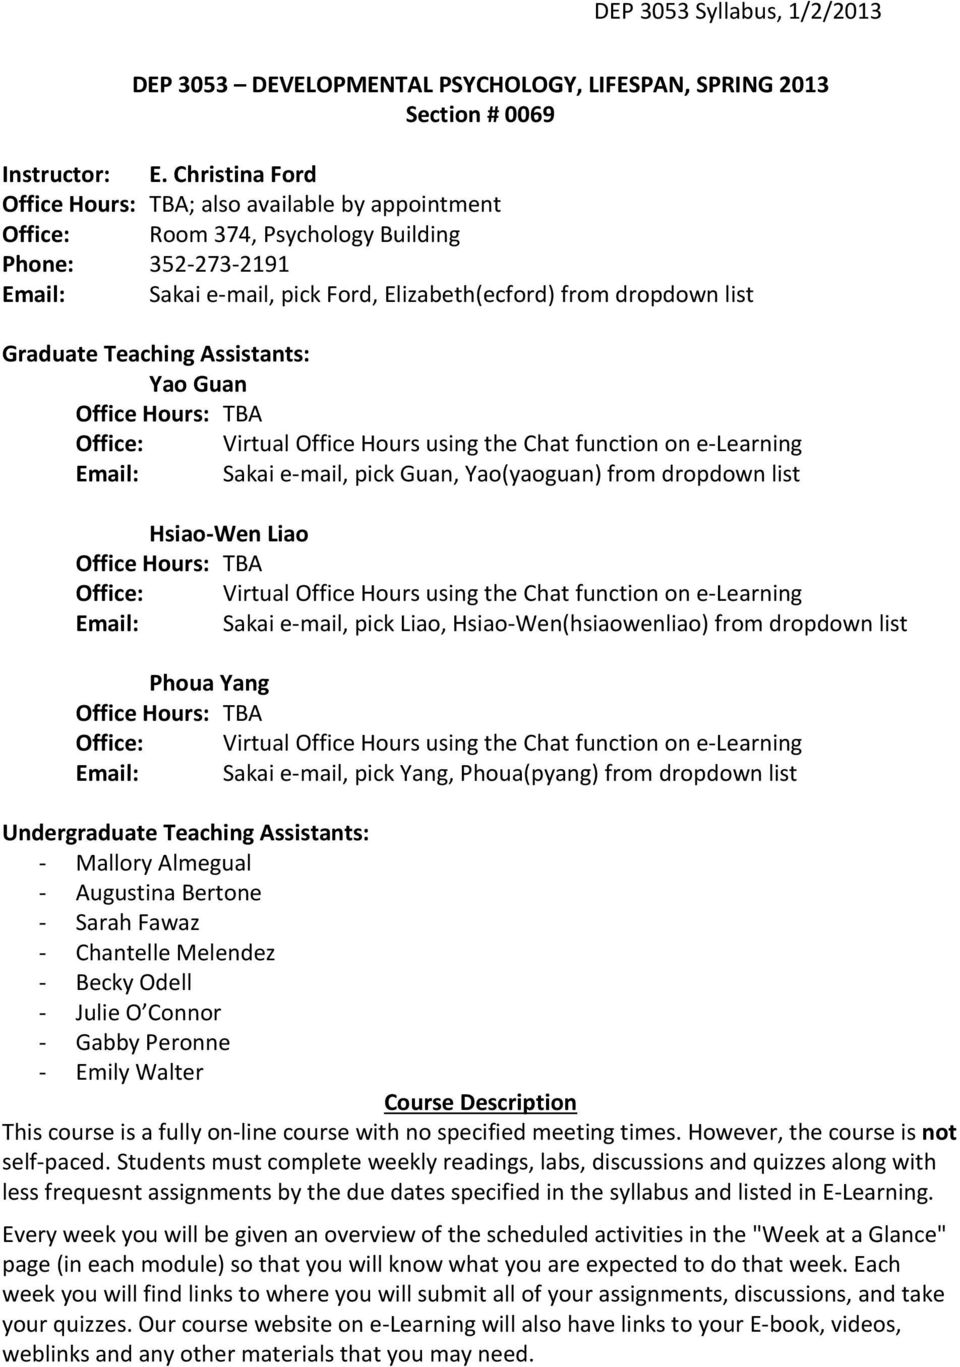 Teaching Assistants: Yao Guan Office Hours: TBA Office: Virtual Office Hours using the Chat function on e-learning Email: Sakai e-mail, pick Guan, Yao(yaoguan) from dropdown list Hsiao-Wen Liao